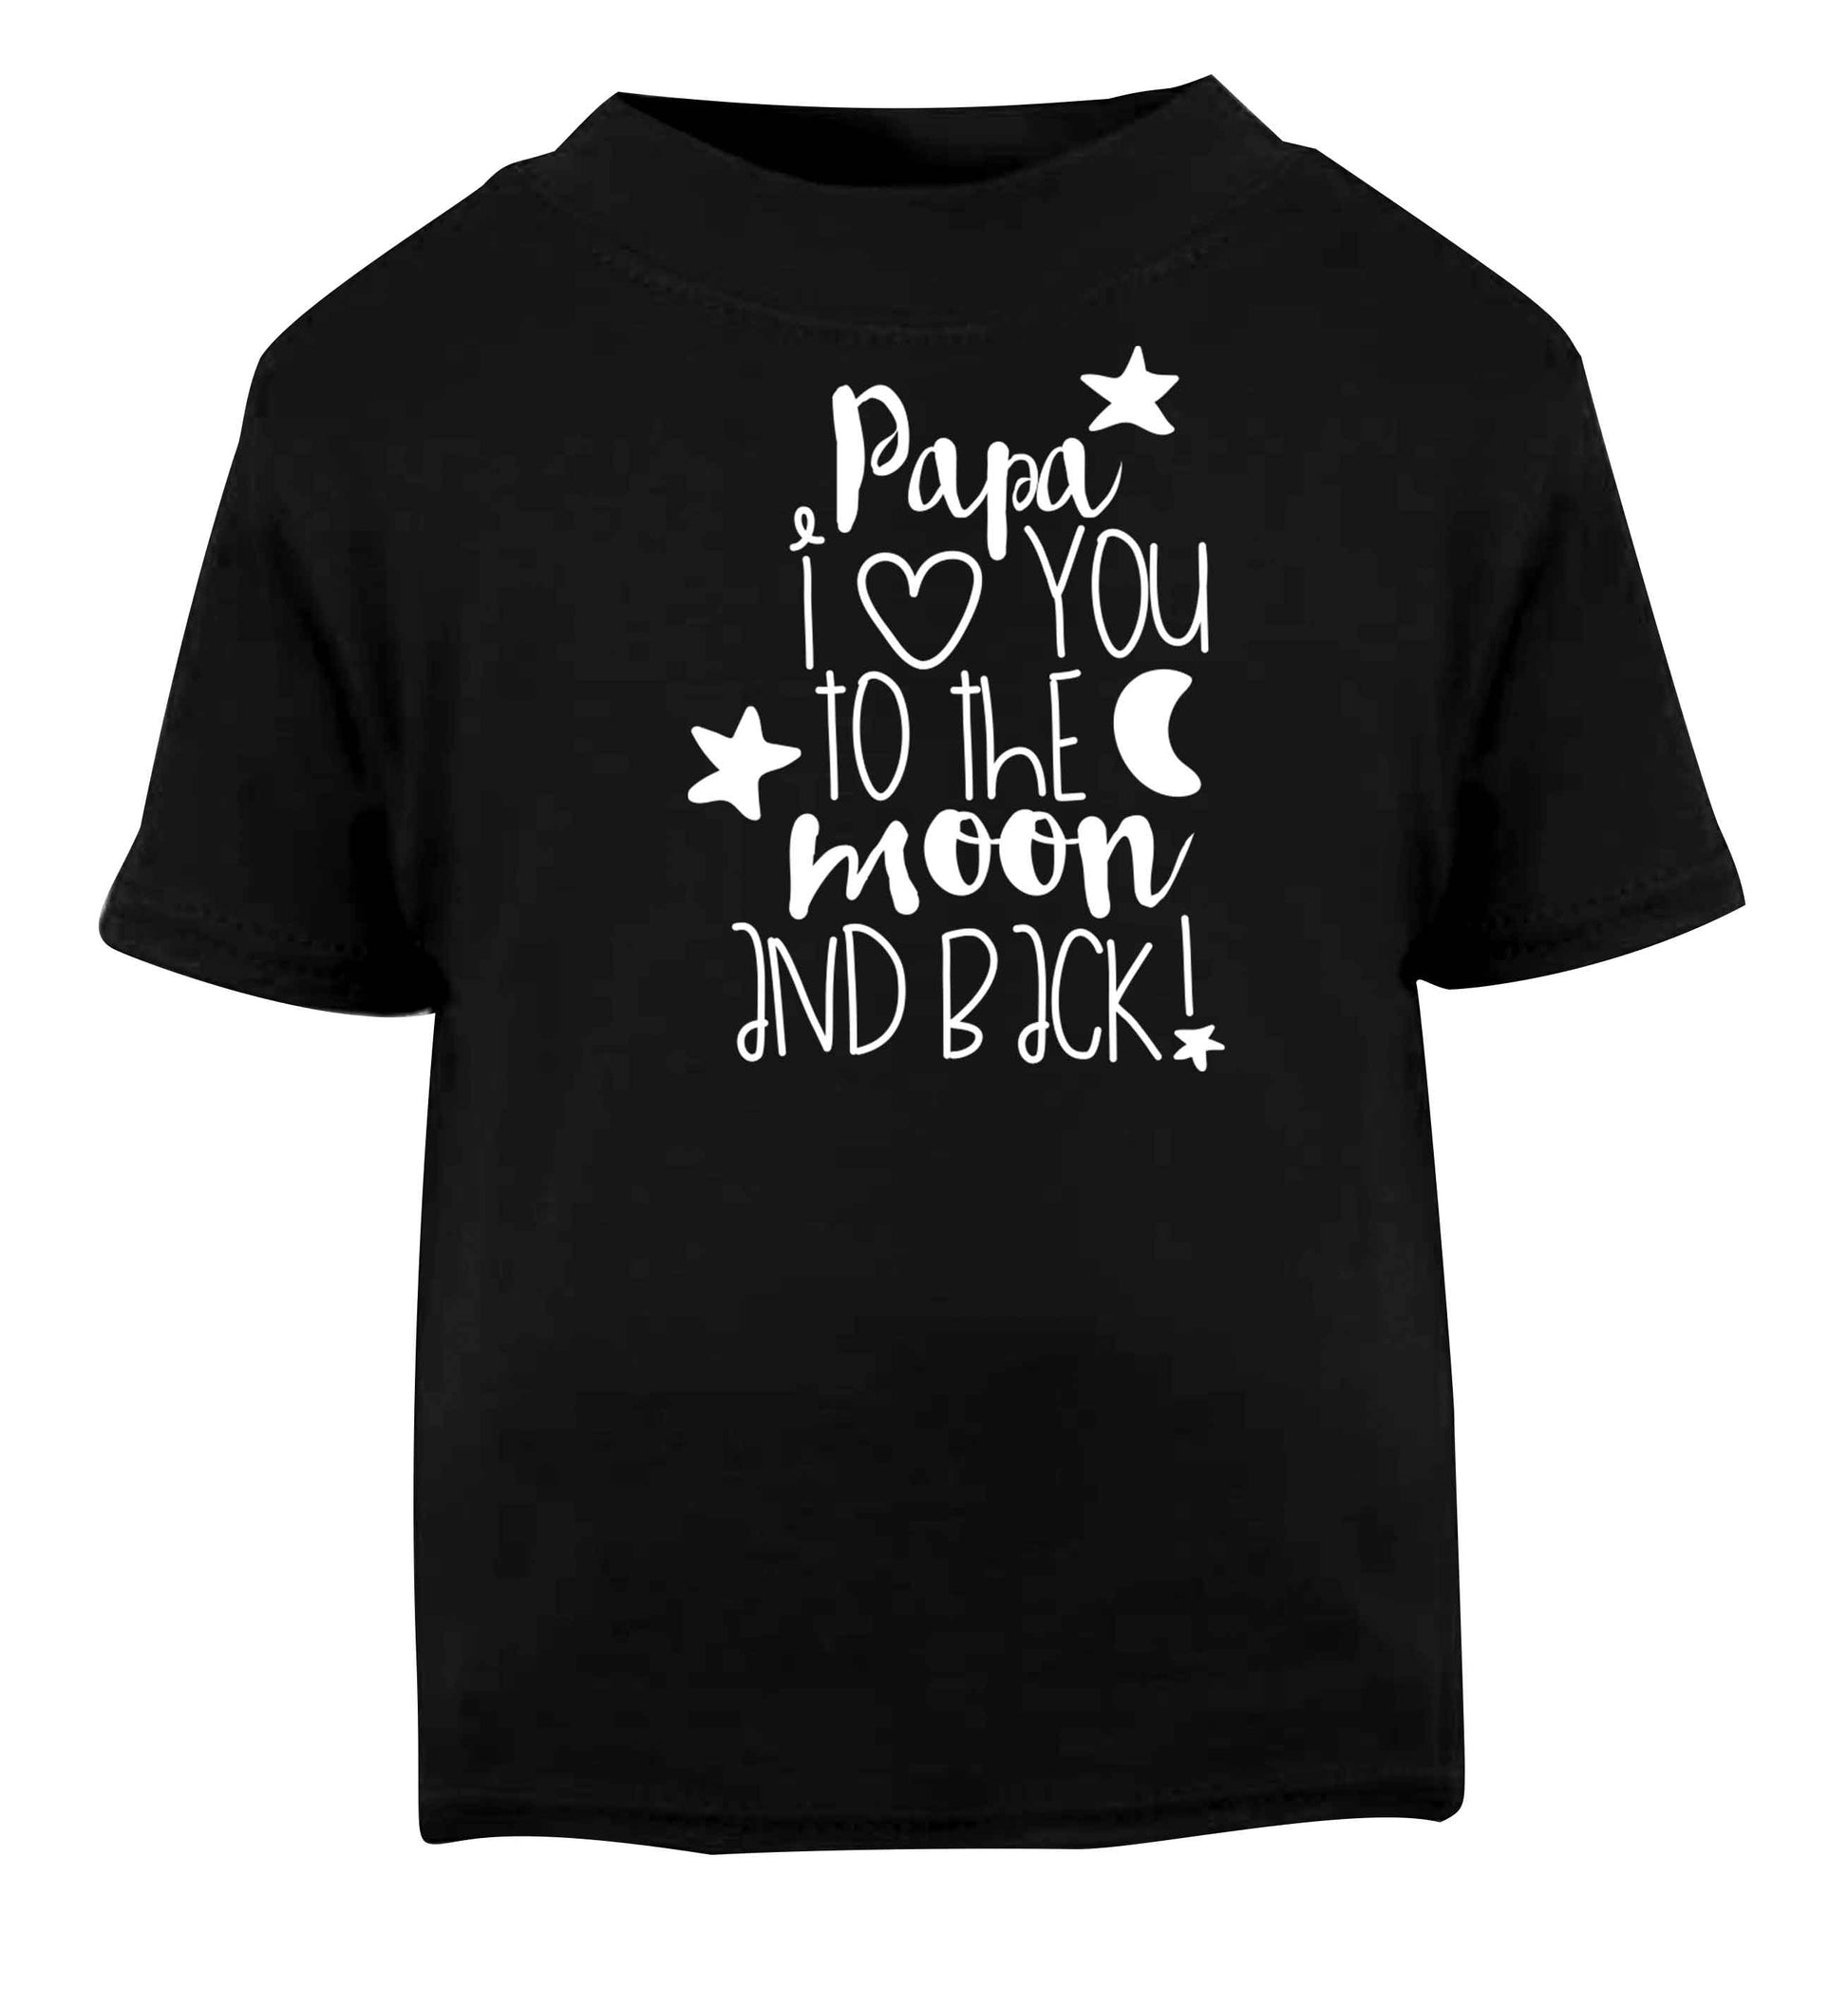 Papa I love you to the moon and back Black baby toddler Tshirt 2 years